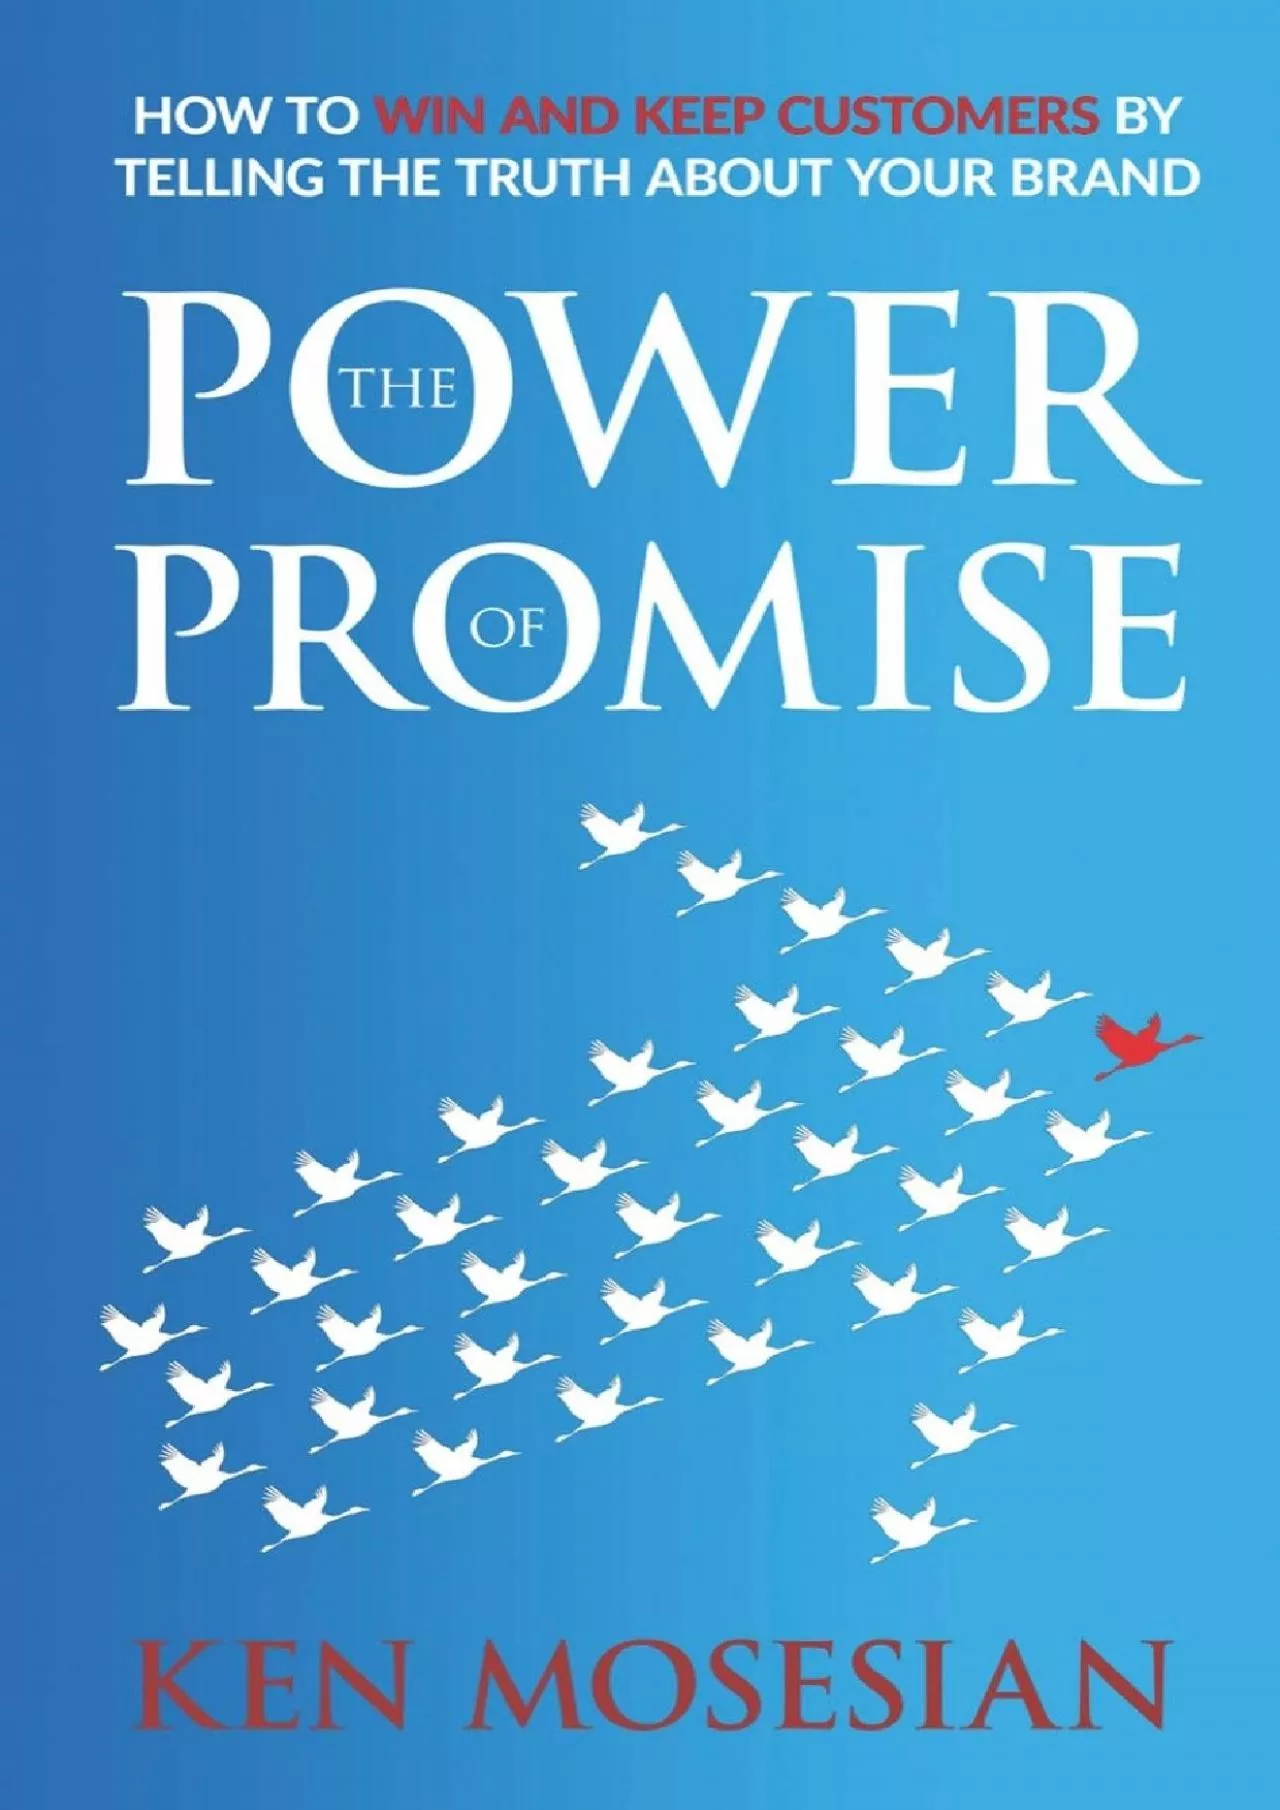 (BOOS)-The Power of Promise: How to win and keep customers by telling the truth about